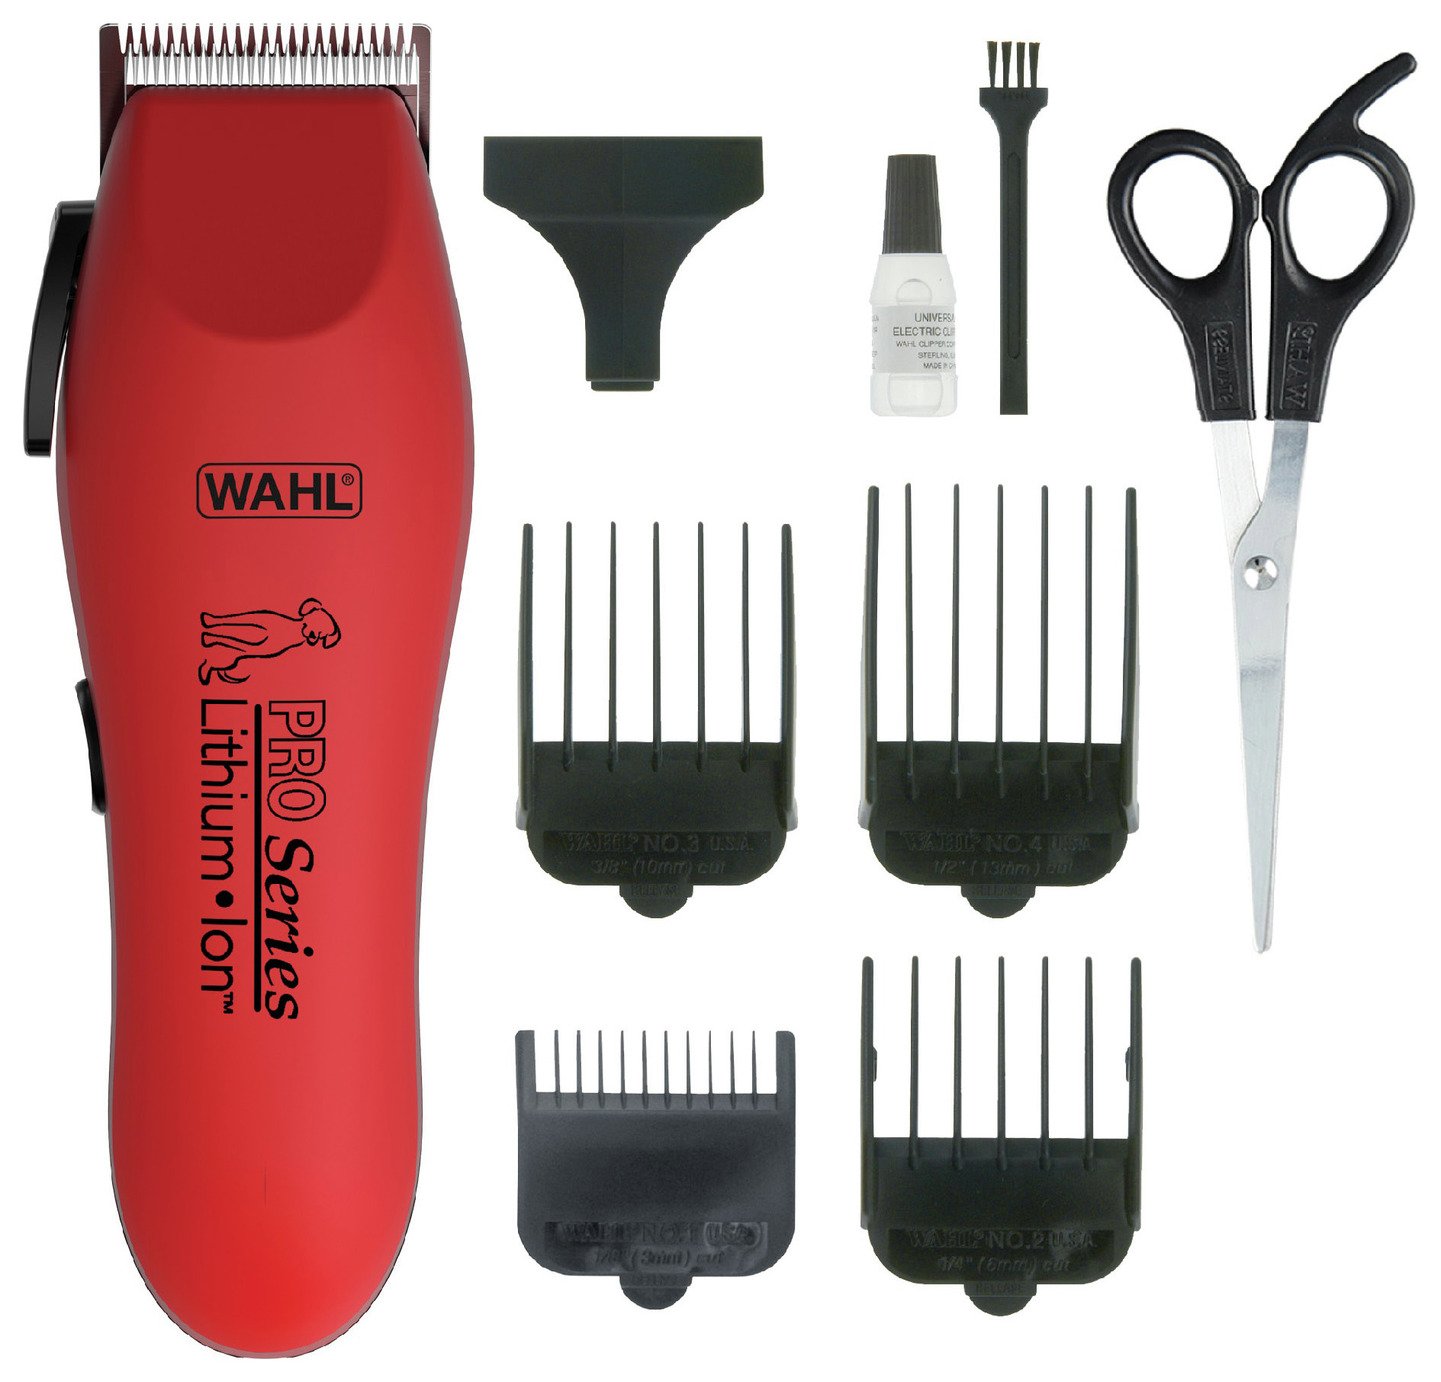 cordless clippers for dog grooming